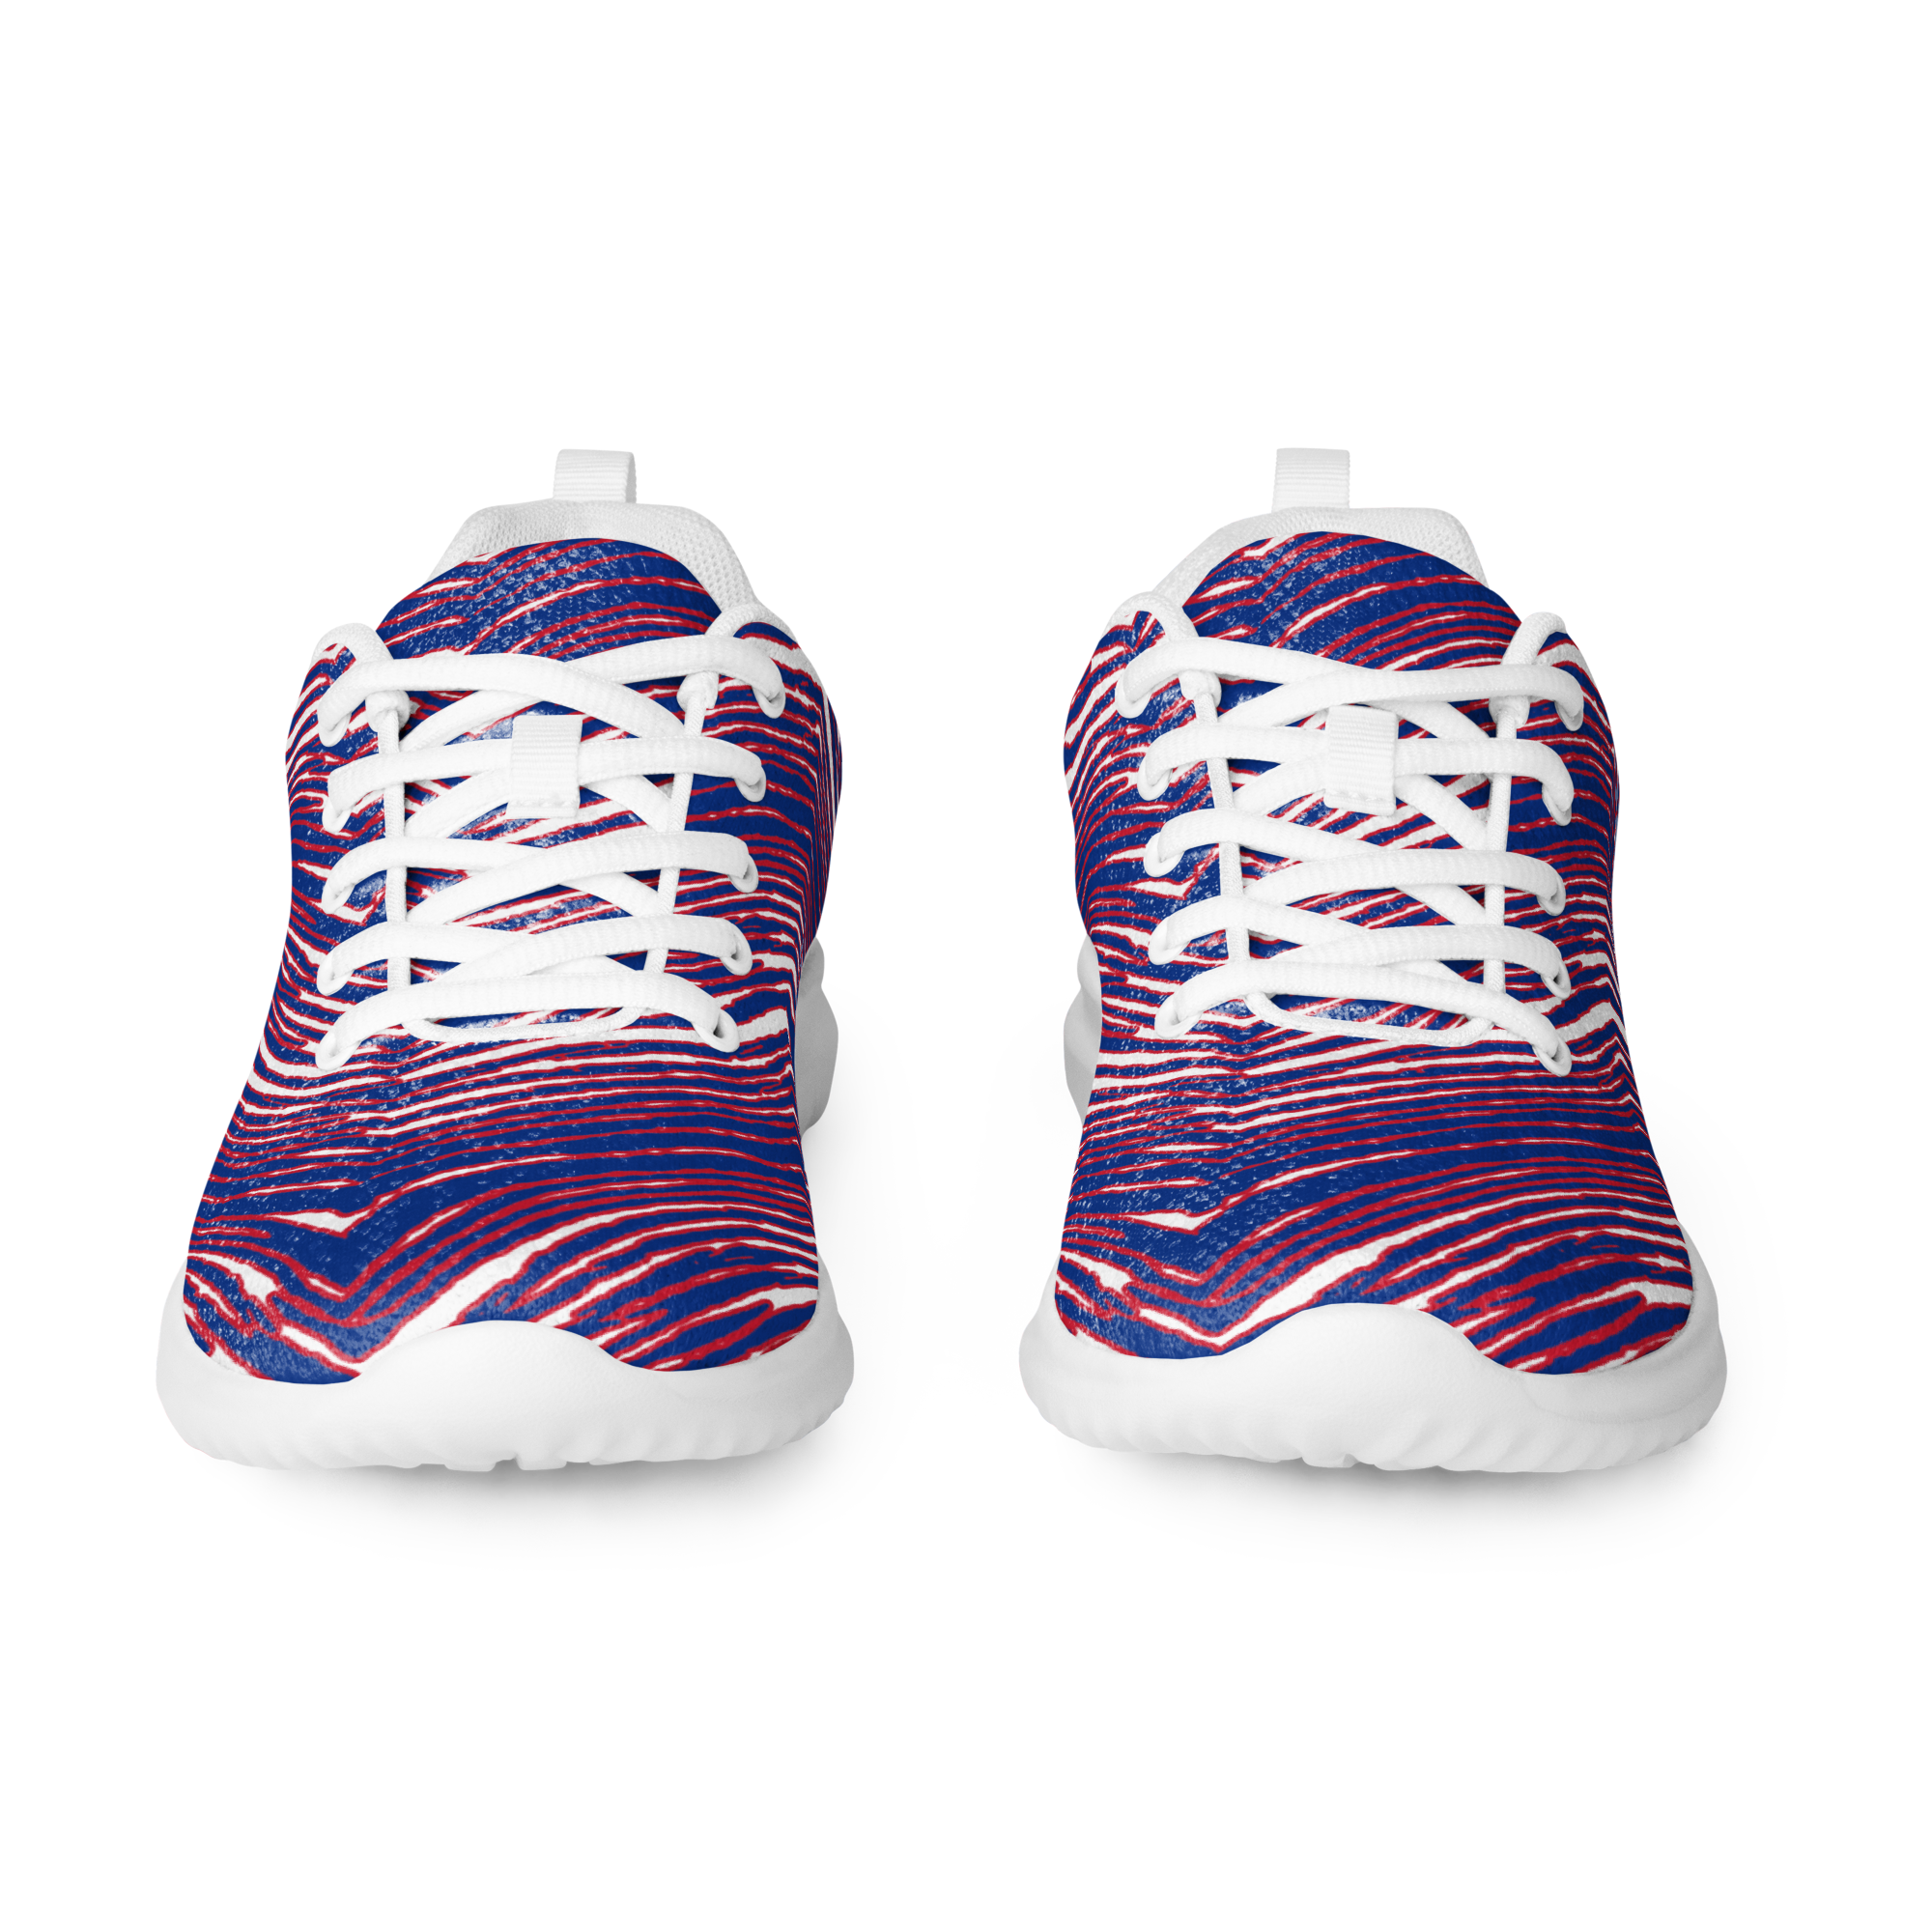 MAFIA Gear: Officially Licensed Zubaz Women's Athletic Shoes – 26 